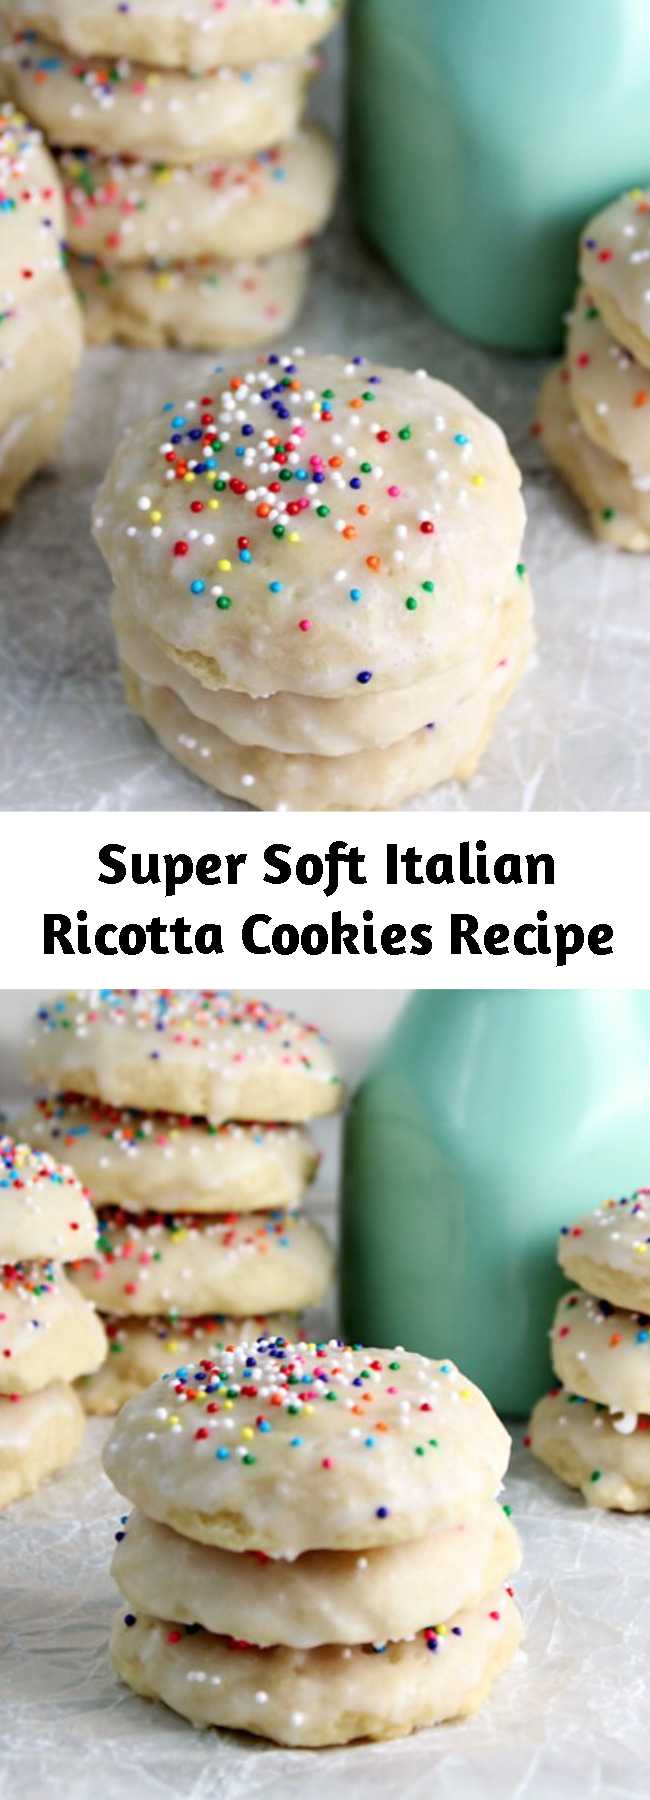 Super Soft Italian Ricotta Cookies Recipe - These Italian Ricotta Cookies are super soft and absolutely delicious. Topped with an almond glaze and sprinkles! They are sure to become a family favorite!